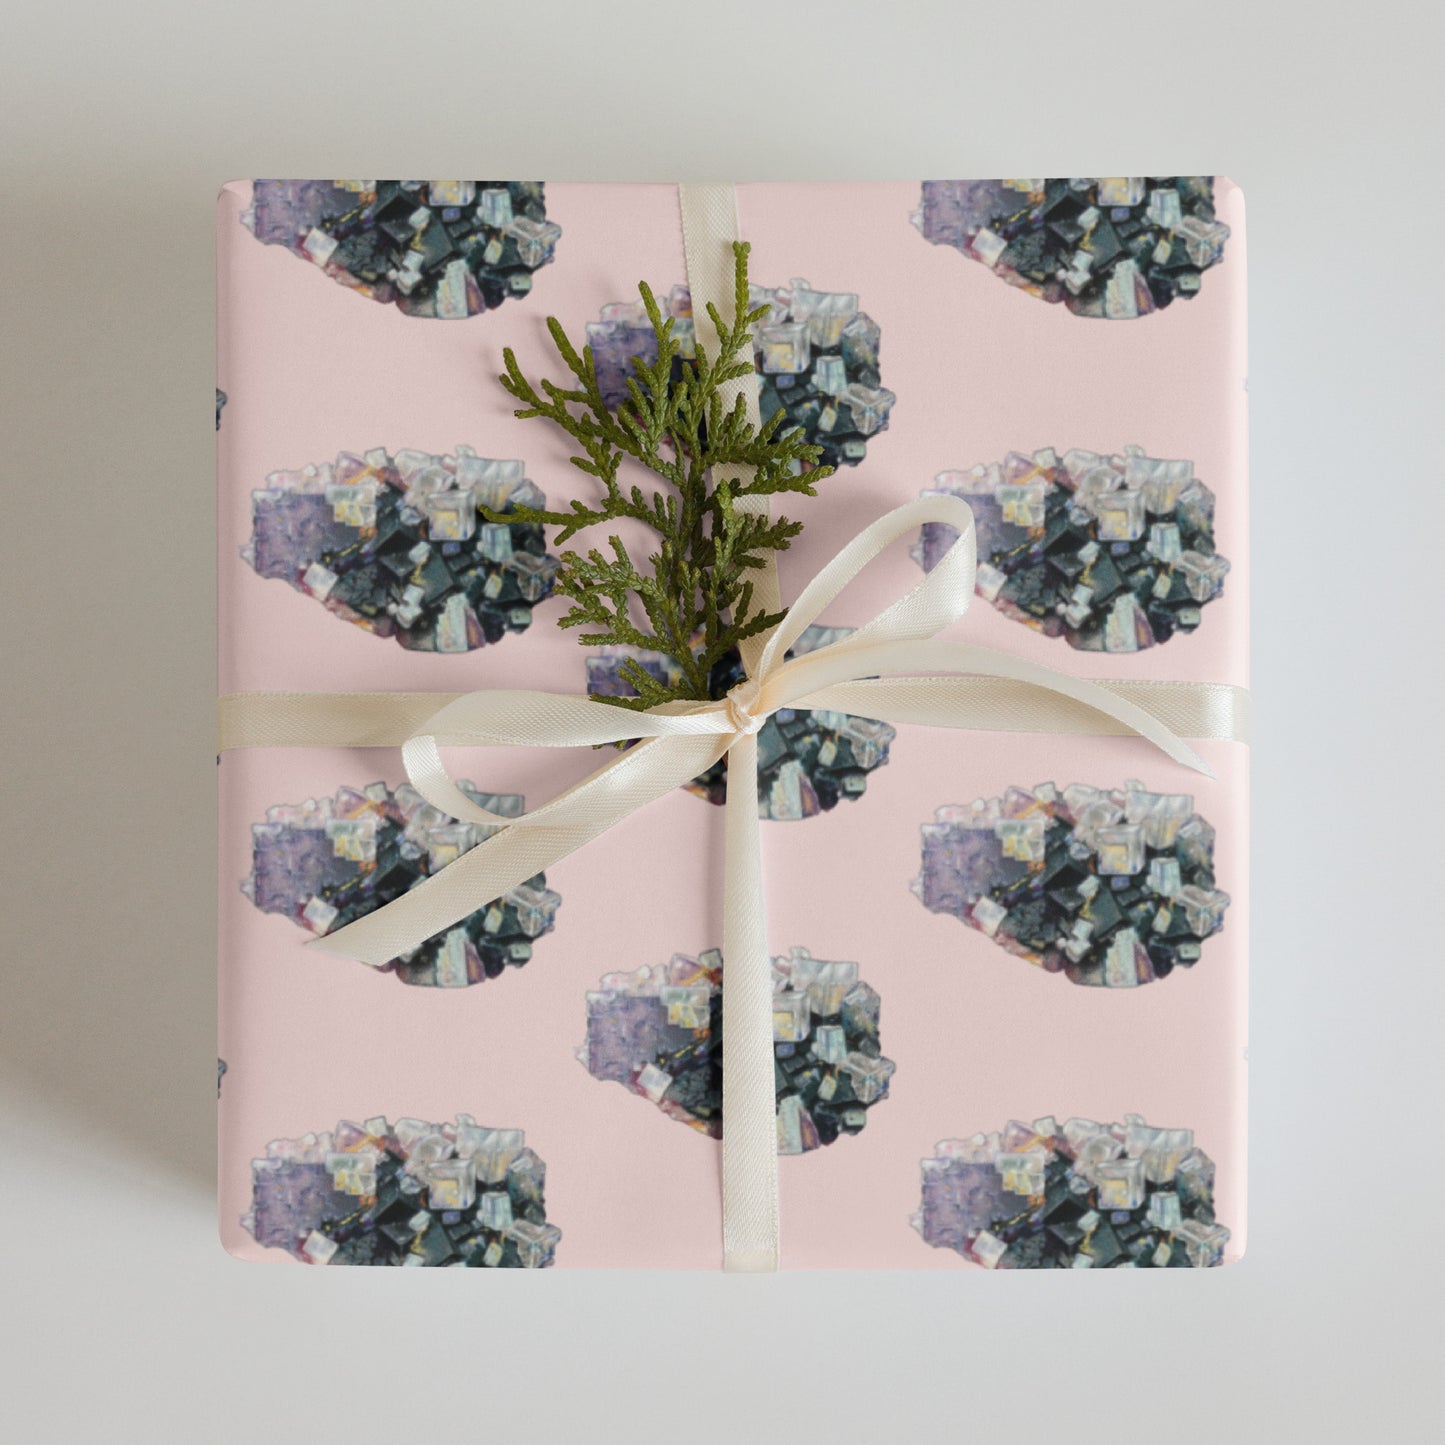 Mineral Wrapping paper sheets - Fluorite, Wulfenite, Amethyst